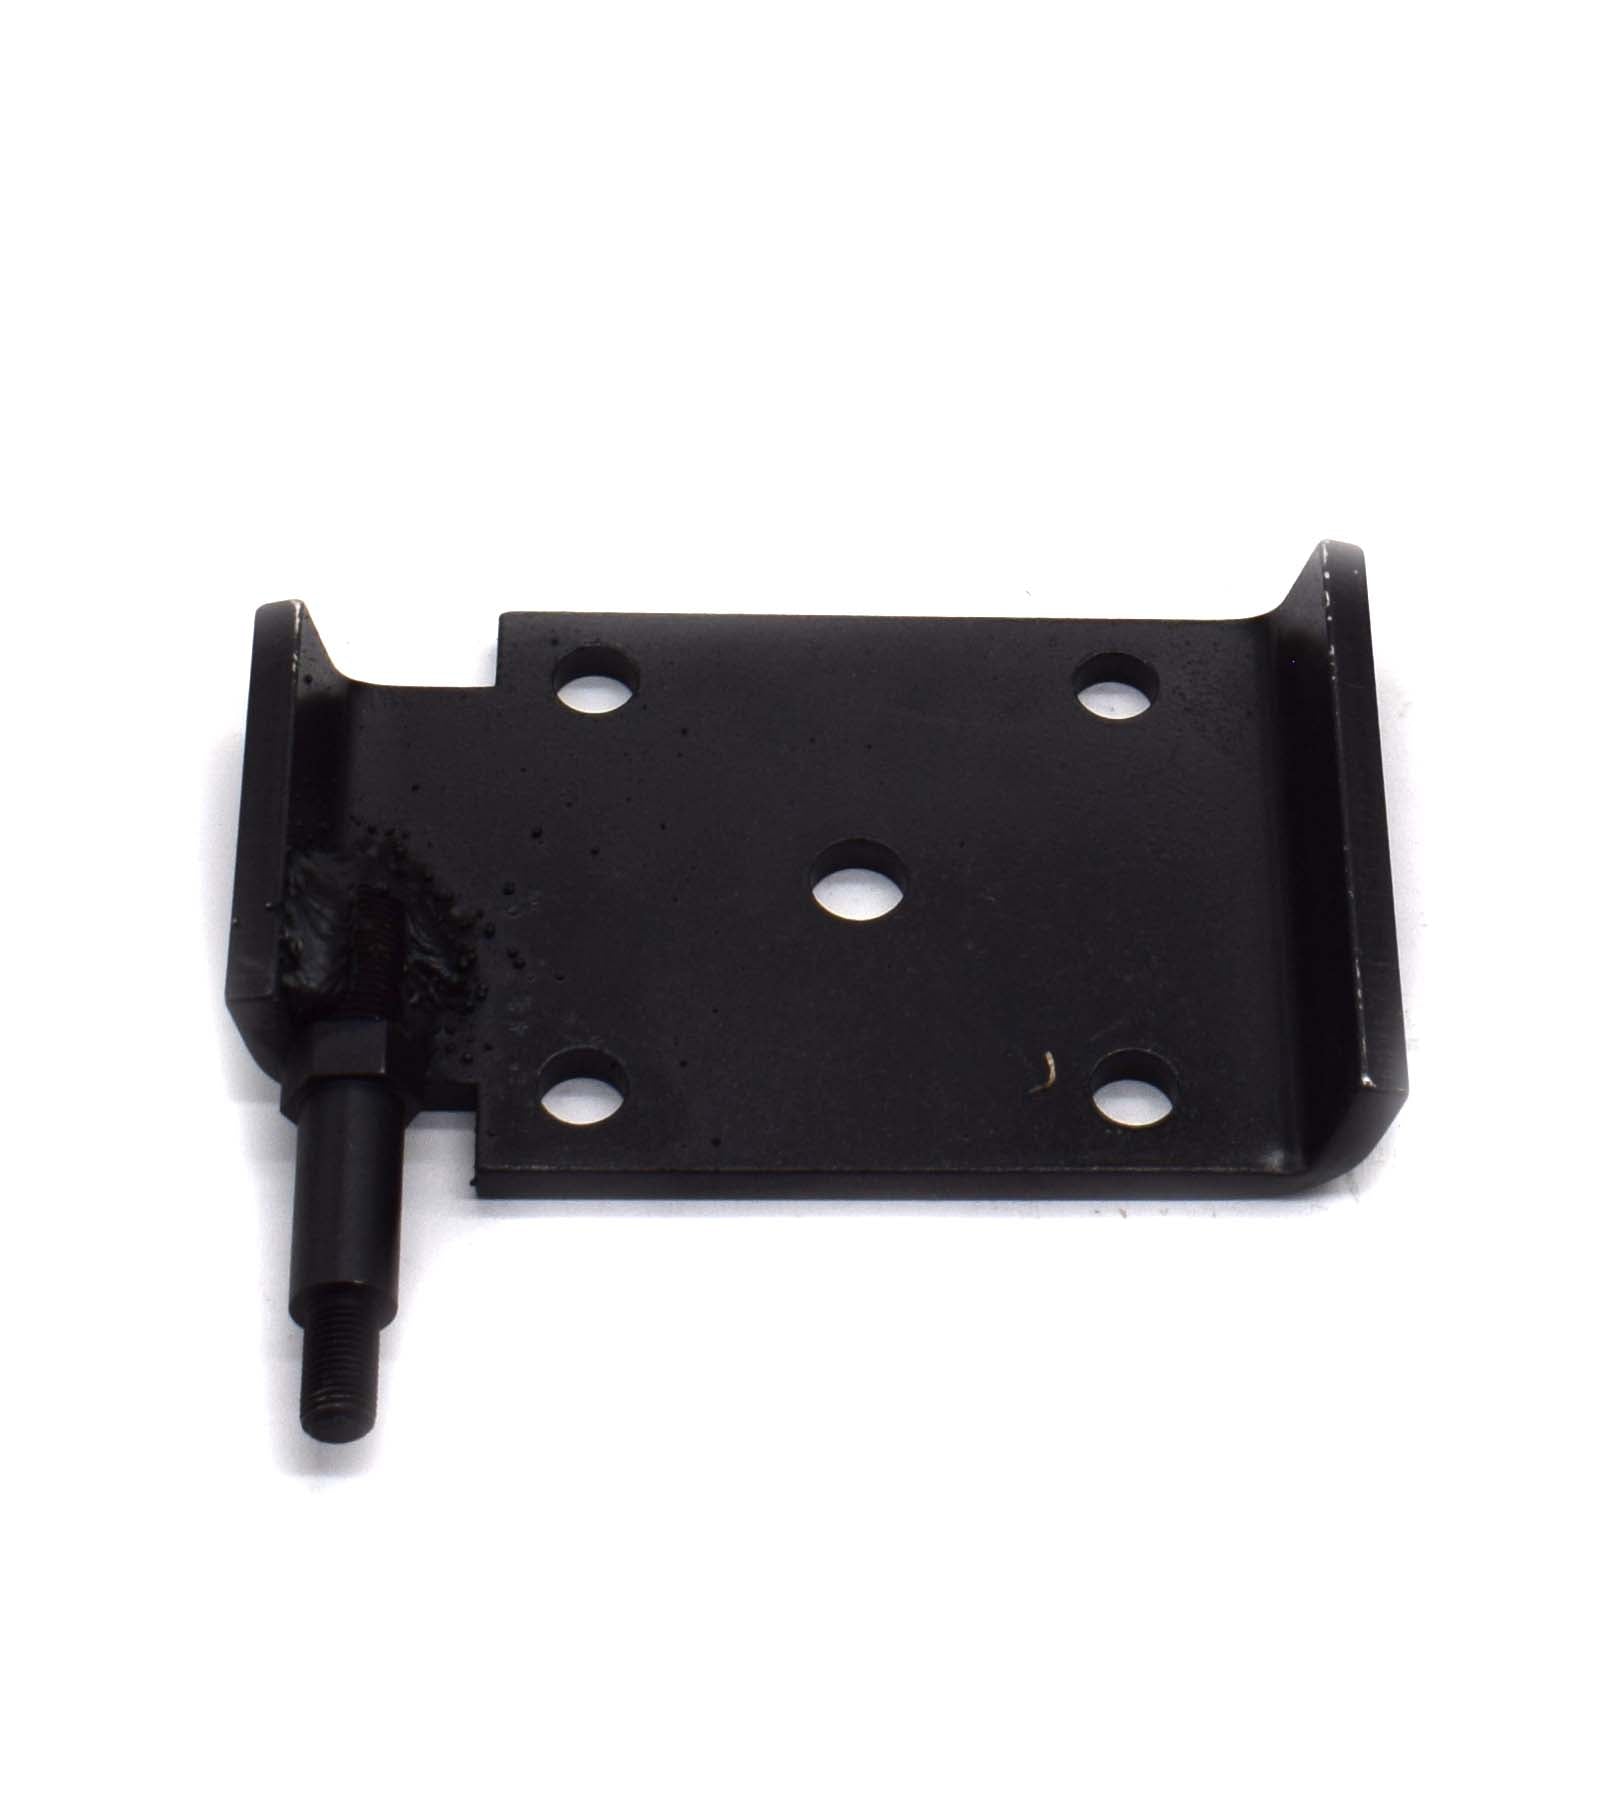 Leaf Spring Shock Mount Plate, Rear Passenger Side, 1967-1973, Jeepster Commando and Jeep Commando - The JeepsterMan